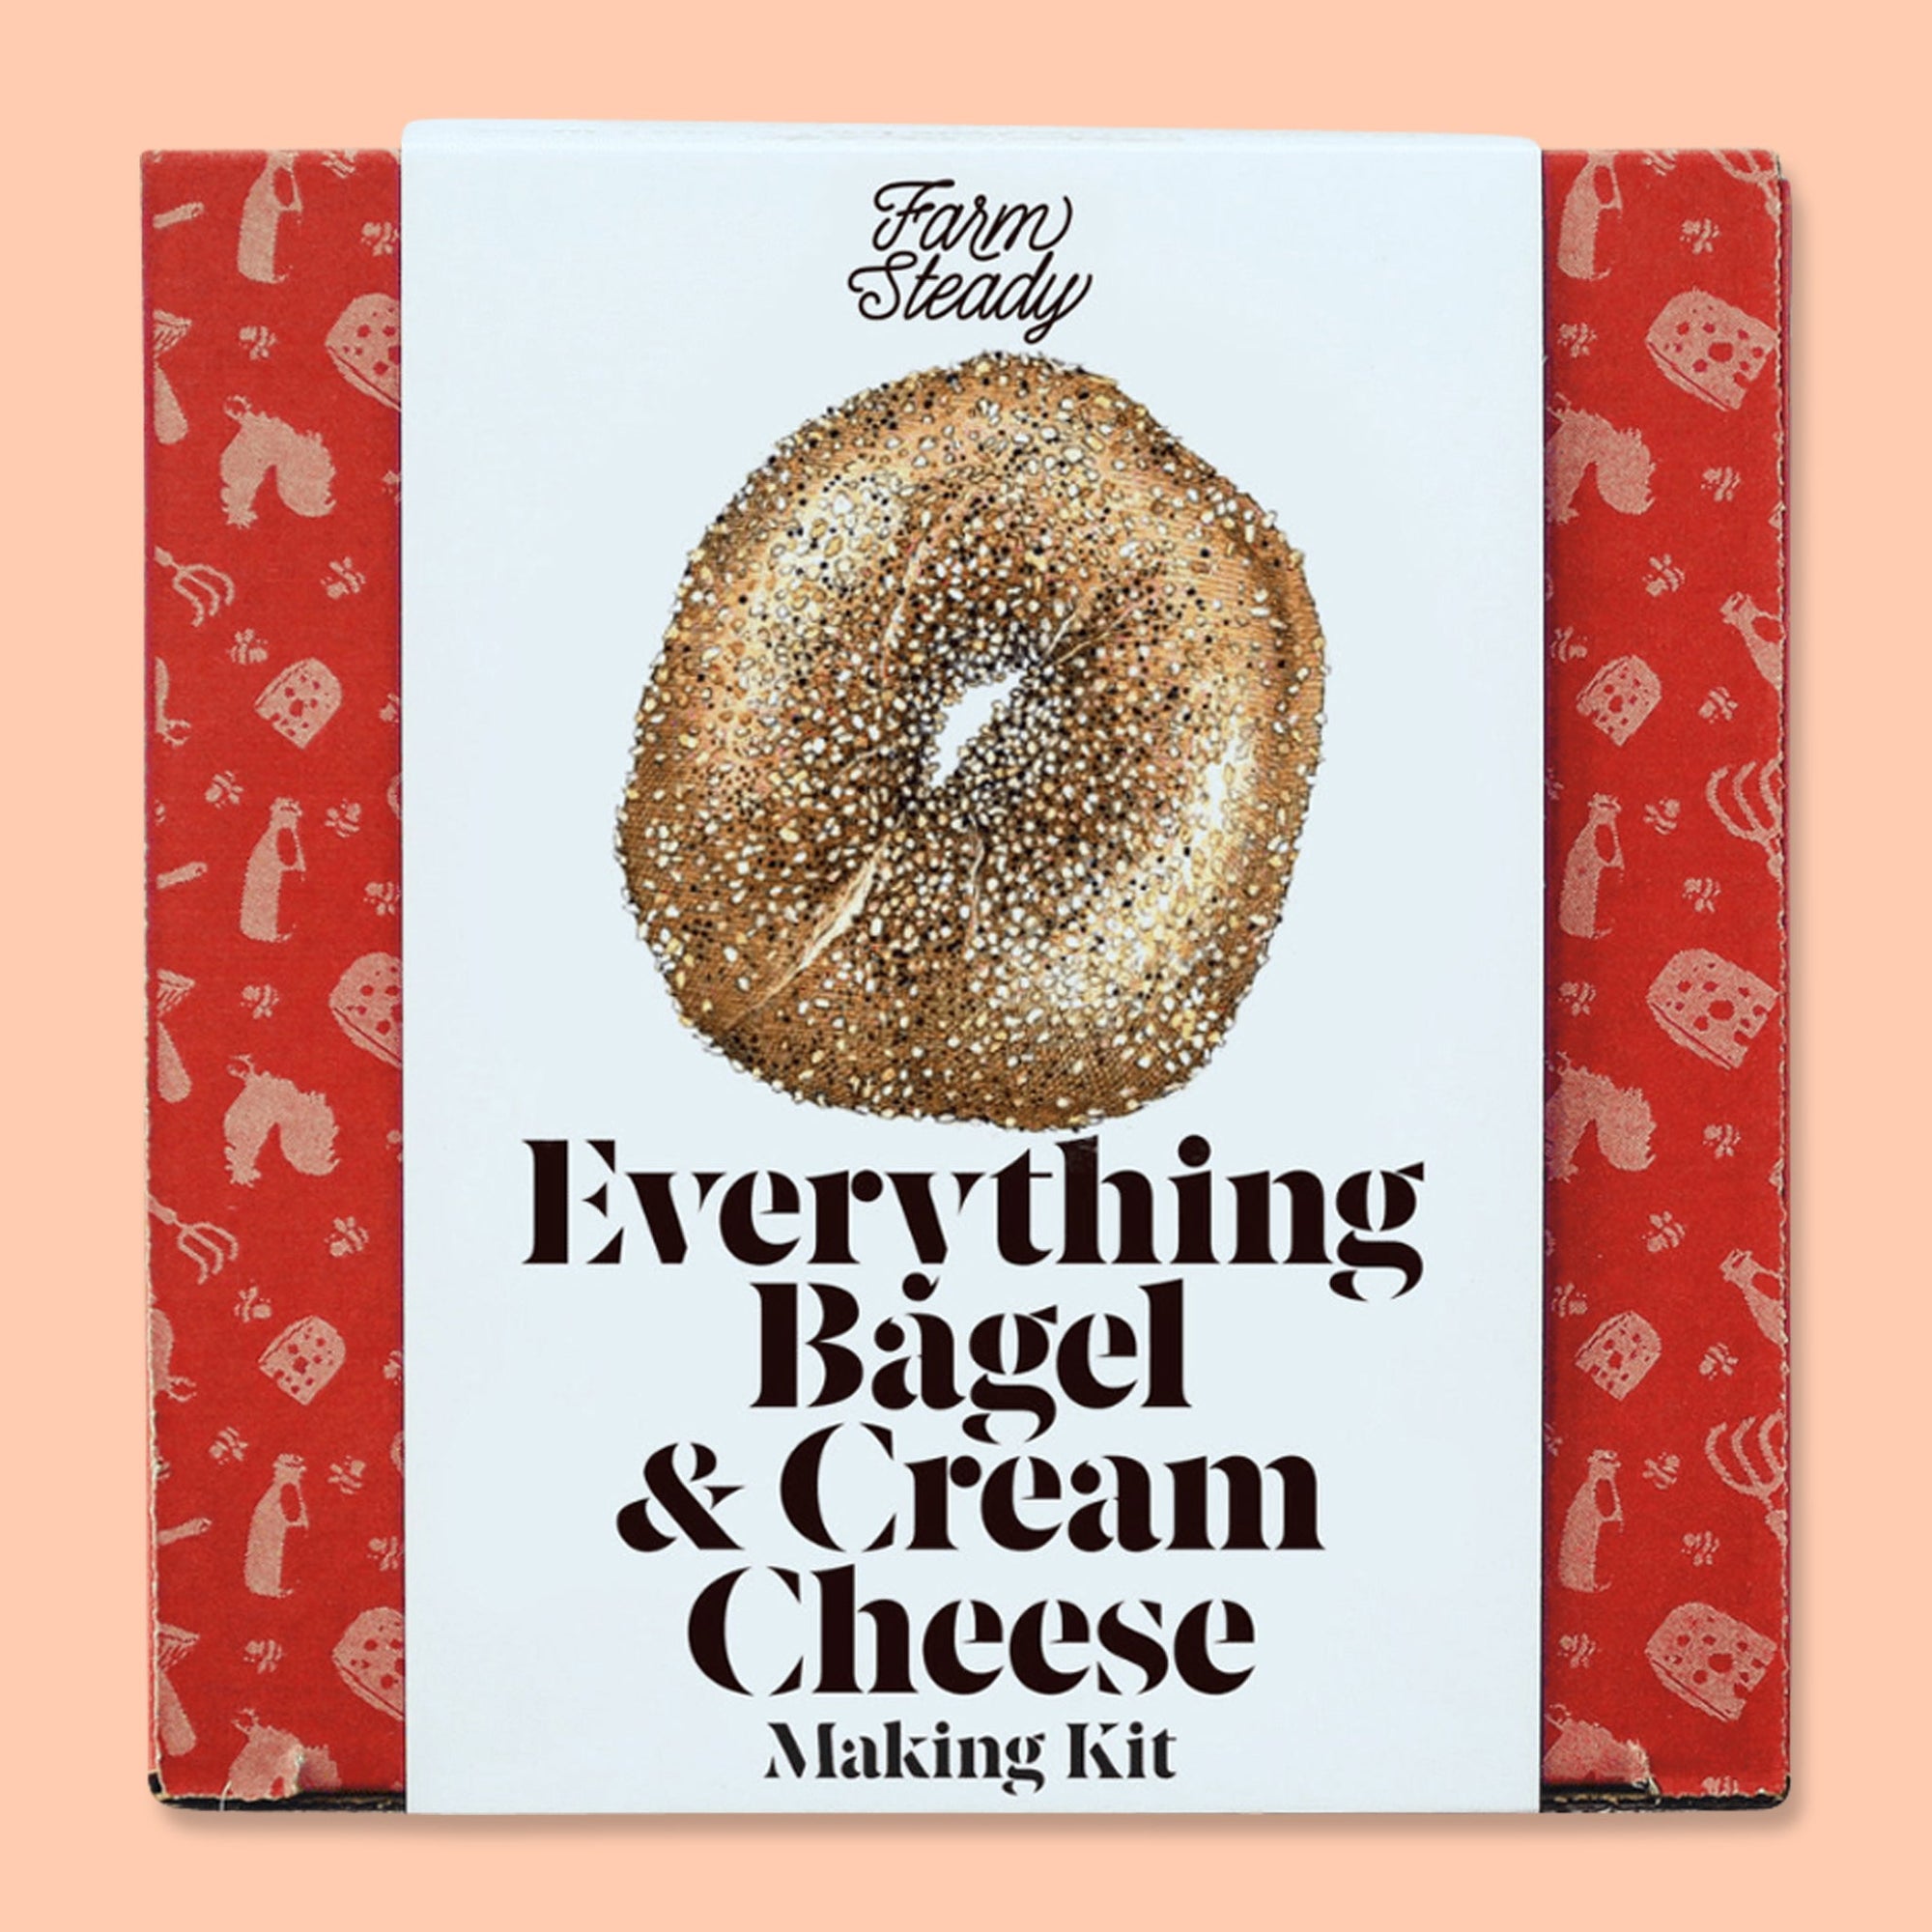 Make Your Own Everything Bagel & Cream Cheese